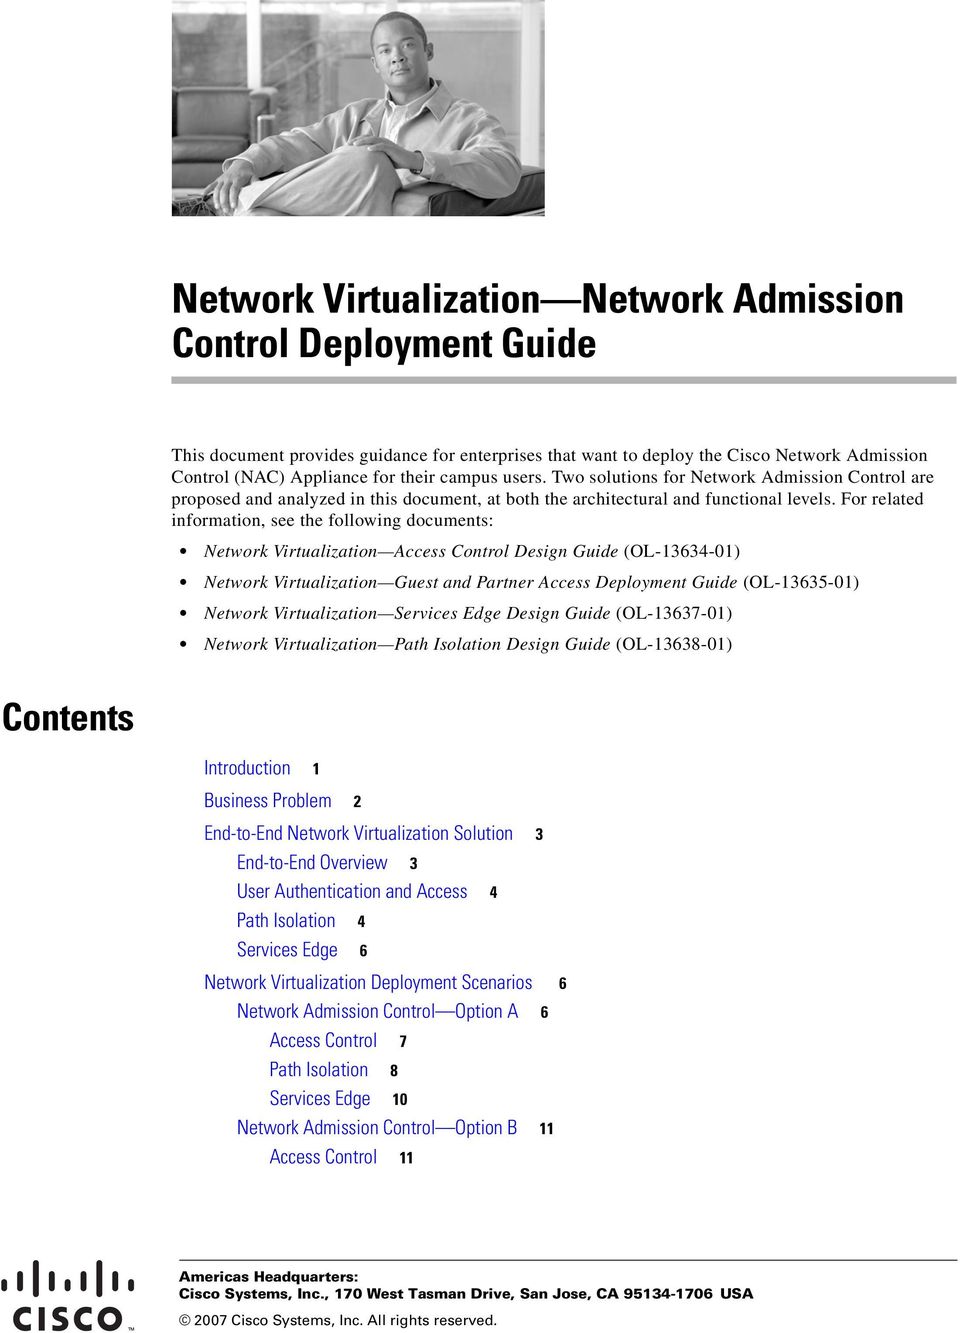 For related information, see the following documents: Network Virtualization Access Control Design Guide (OL-13634-01) Network Virtualization Guest and Partner Access Deployment Guide (OL-13635-01)